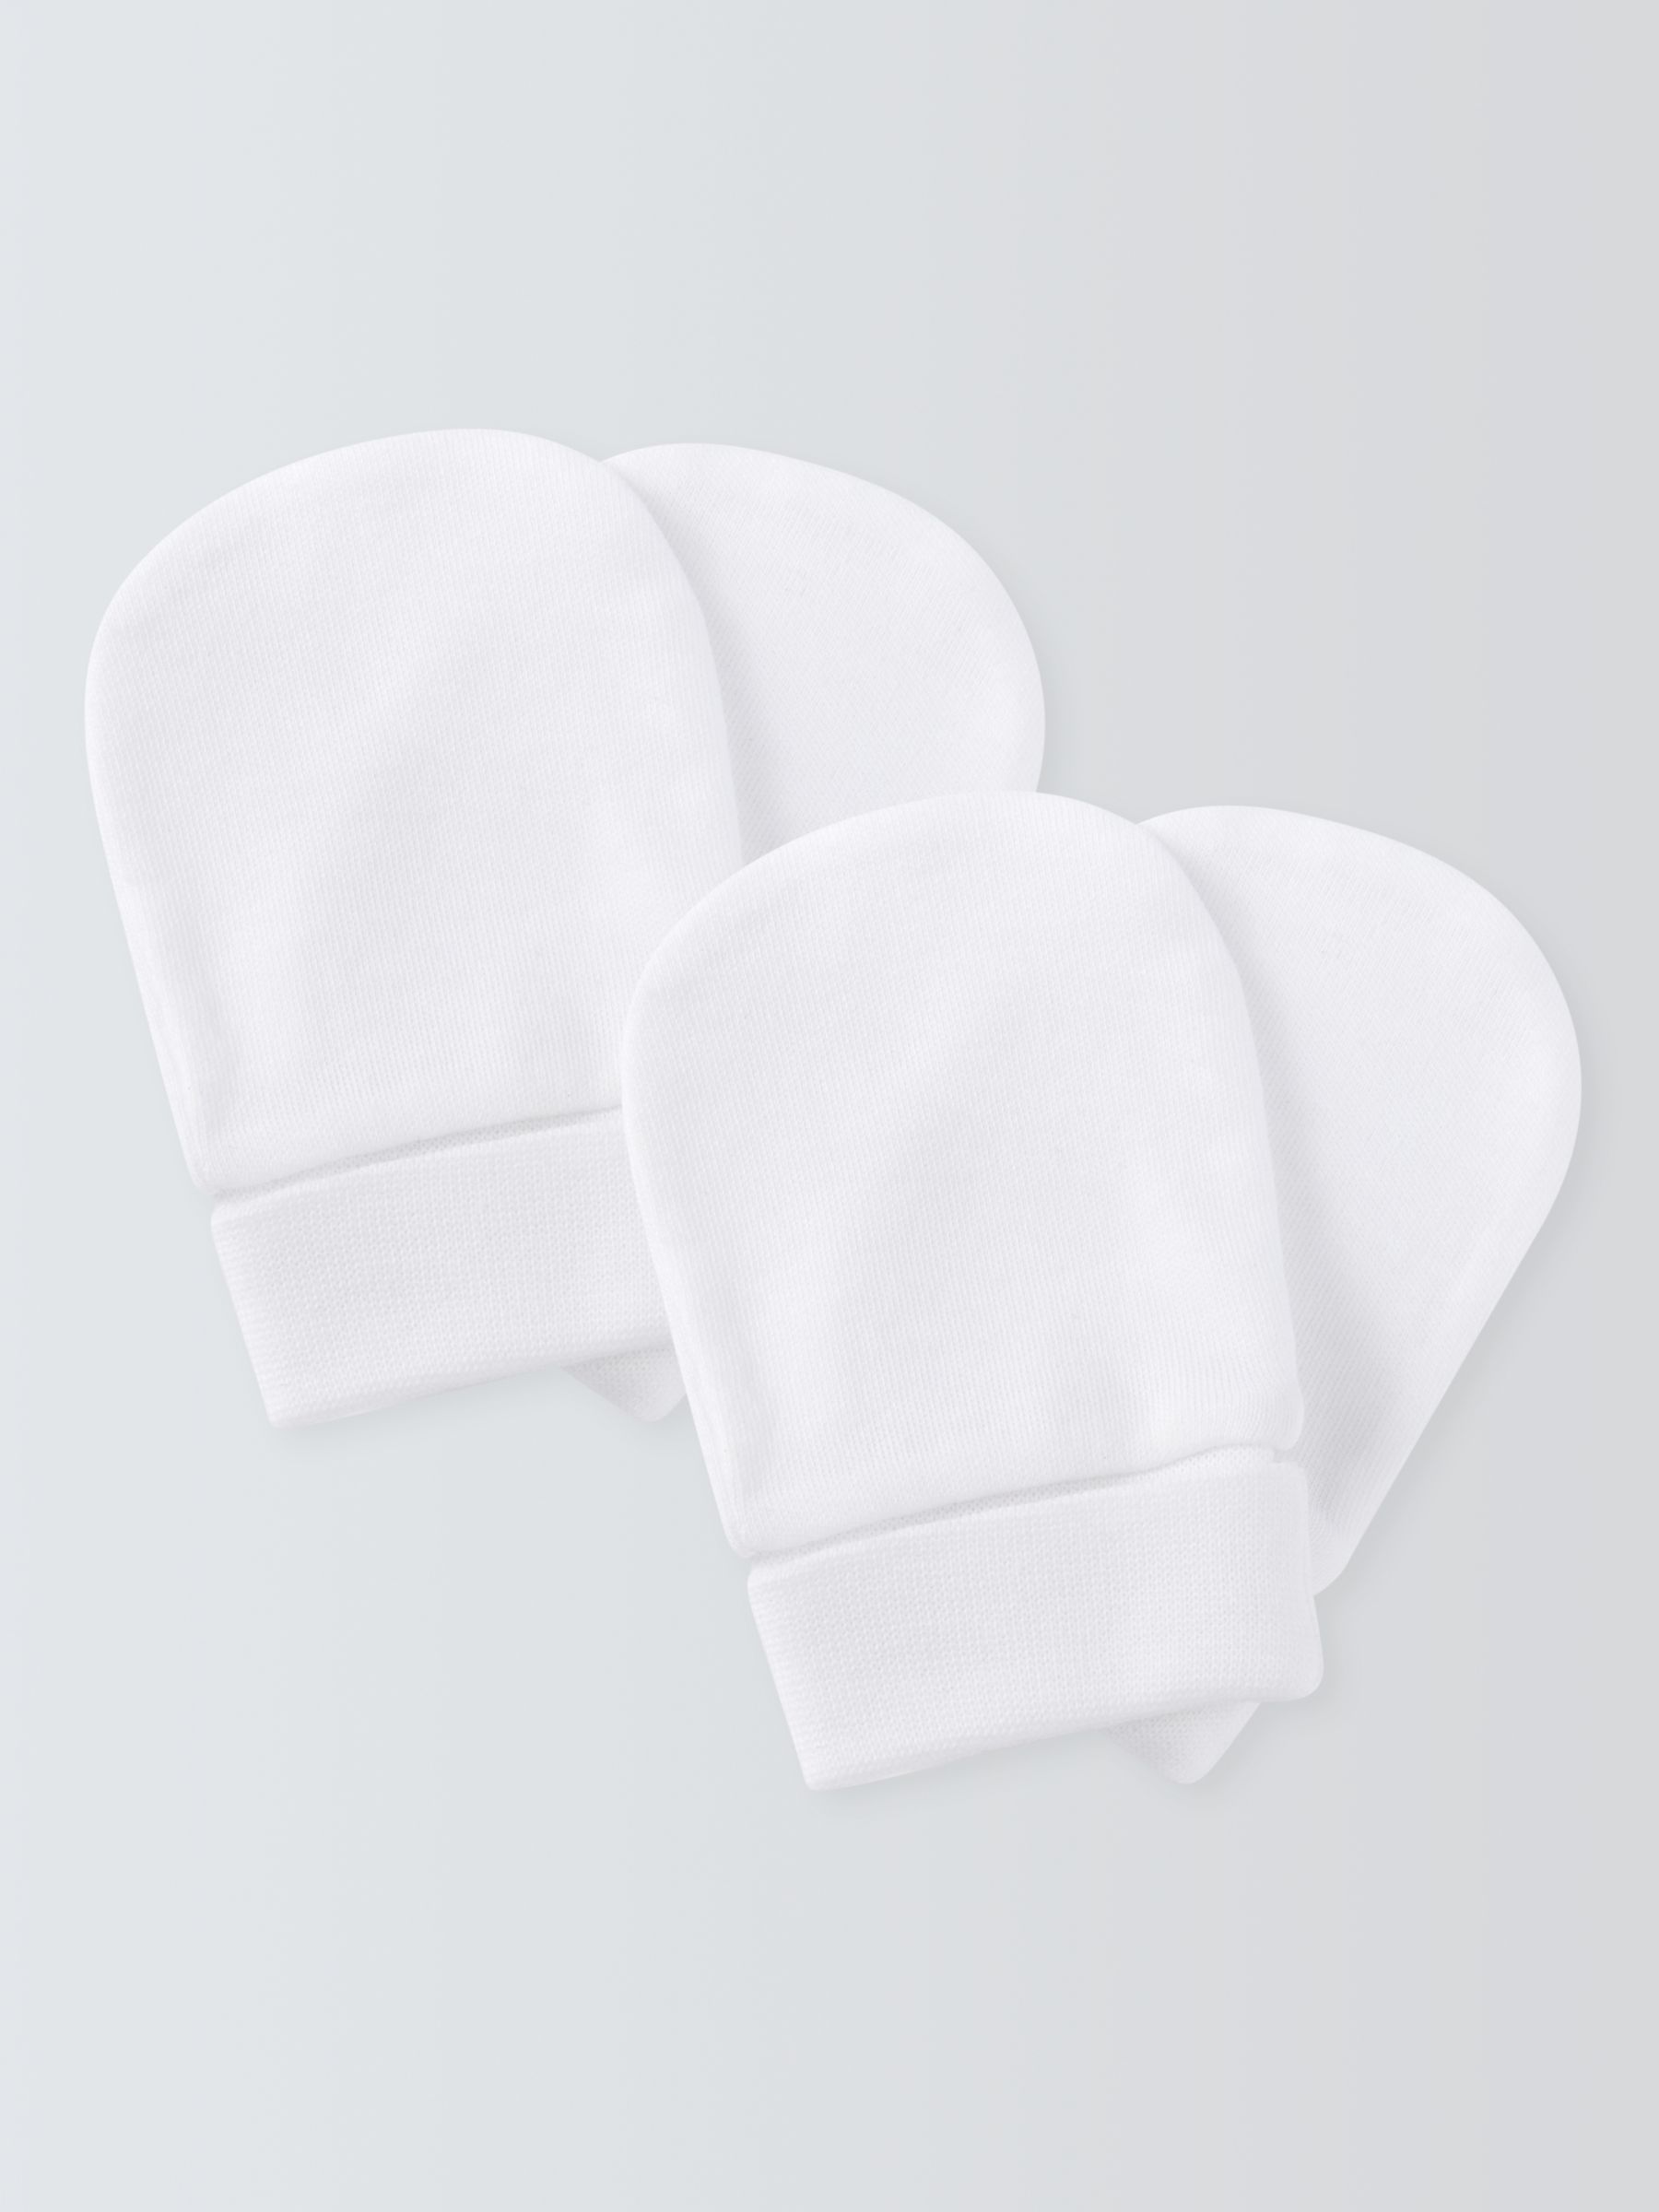 John Lewis Baby Cotton Scratch Mitts, Pack of 2, White, One Size